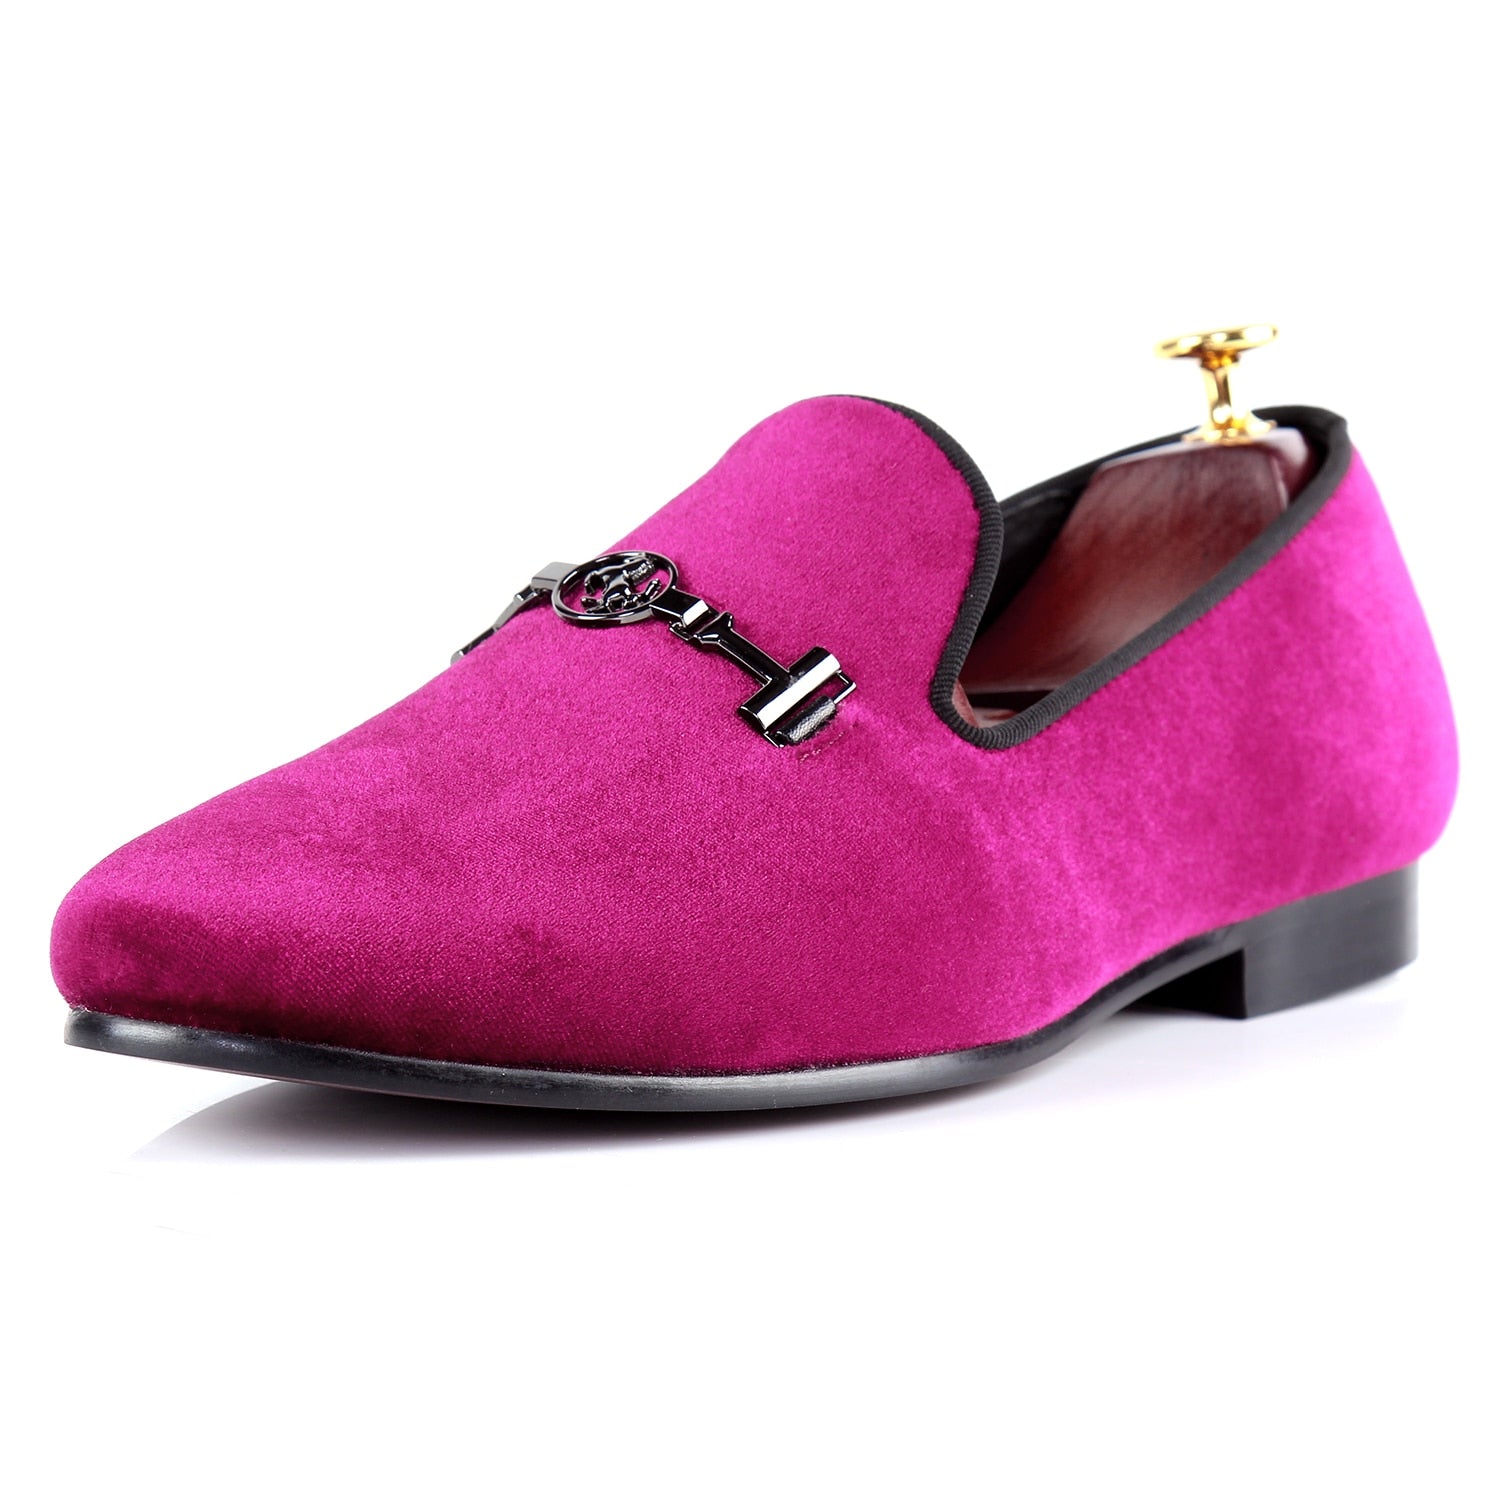 pink prom shoes for men